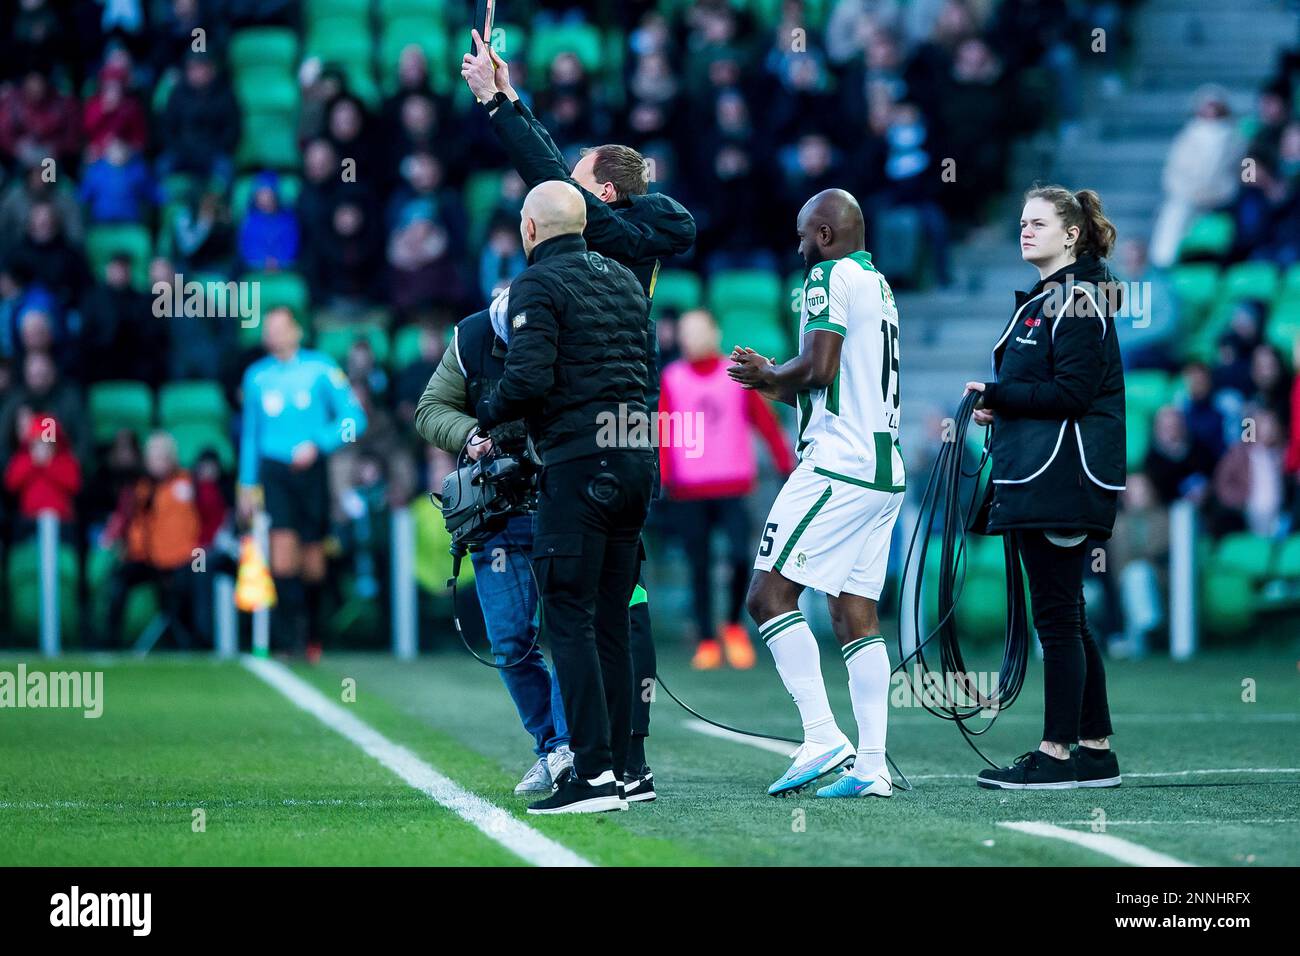 GRONINGEN - (m) 22-time international Jetro Willems makes his debut for FC Groningen during the Dutch premier league match between FC Groningen and Excelsior at the Euroborg stadium on February 25, 2023 in Groningen, Netherlands. ANP COR LASKER Stock Photo